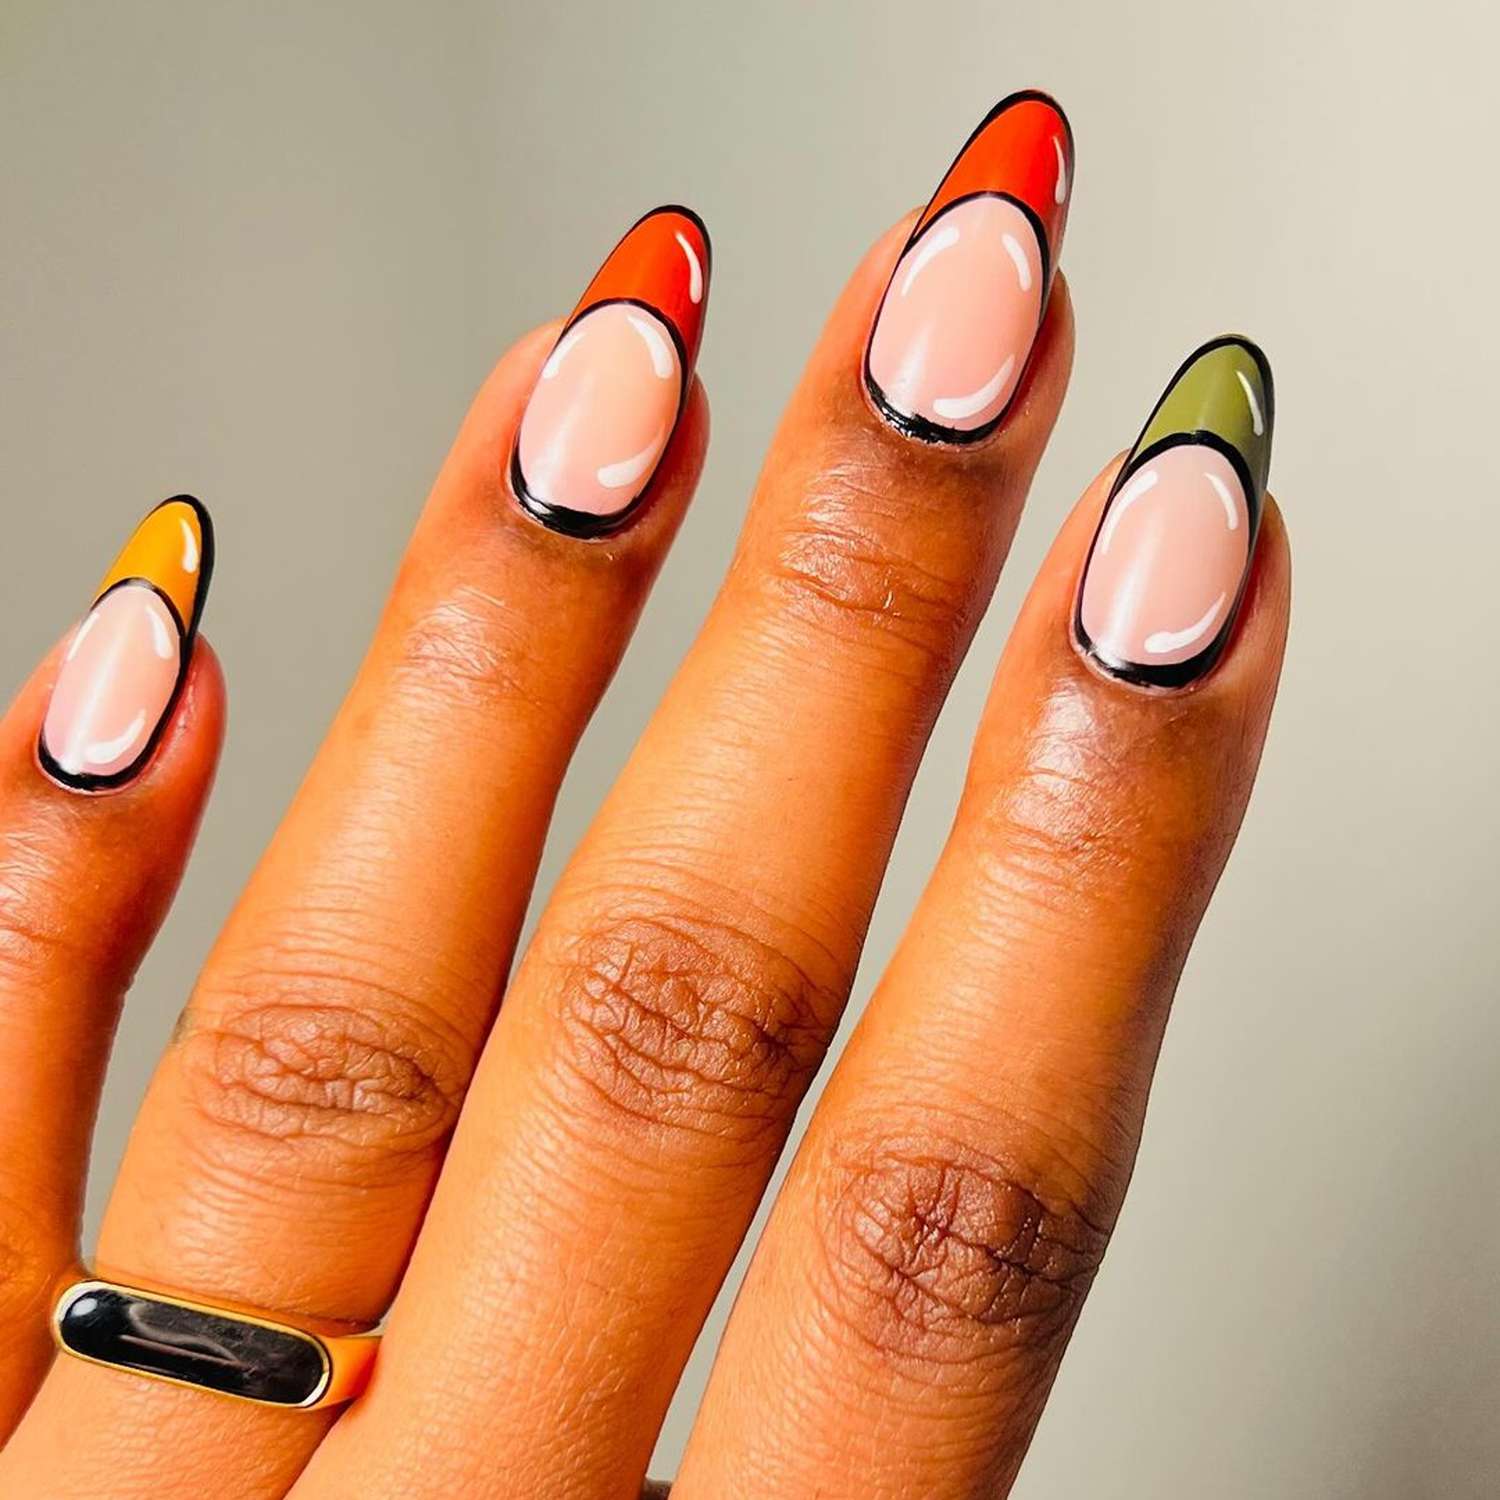 Cartoon French Nails - Byrdie French Skittle Nails